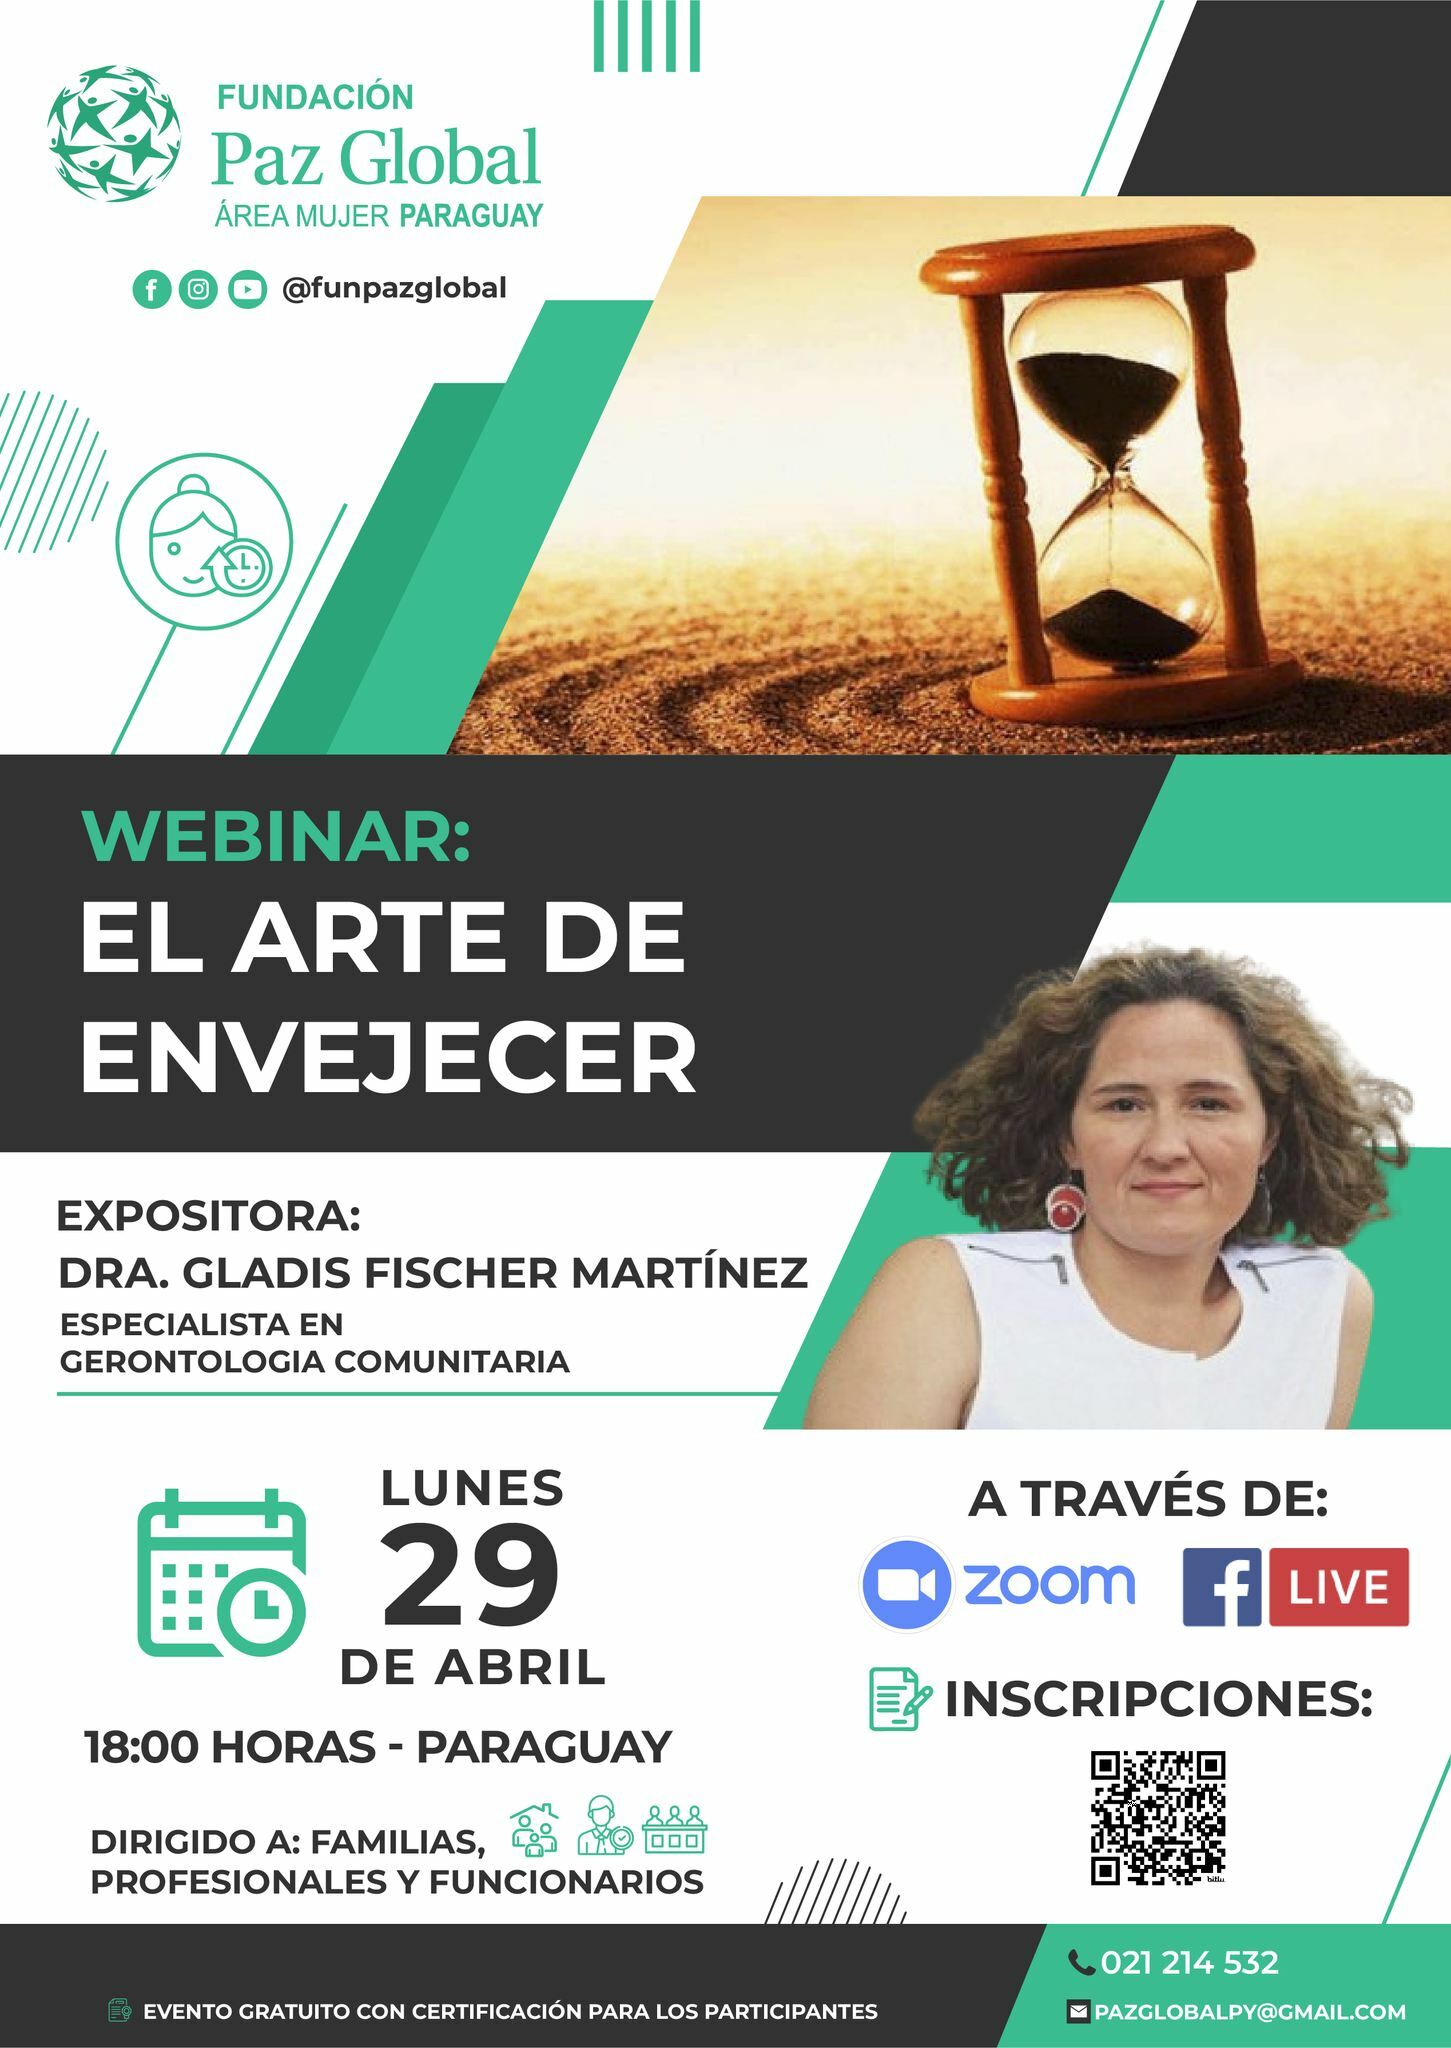 Flyer for a webinar titled "El Arte de Envejecer," hosted by Fundación Paz Global on 29th April at 18:00 hours, featuring expert Dr. Gladis Fischer Martínez. Focused on empowering women for a better future in Paraguay. Includes contact details and social media icons.